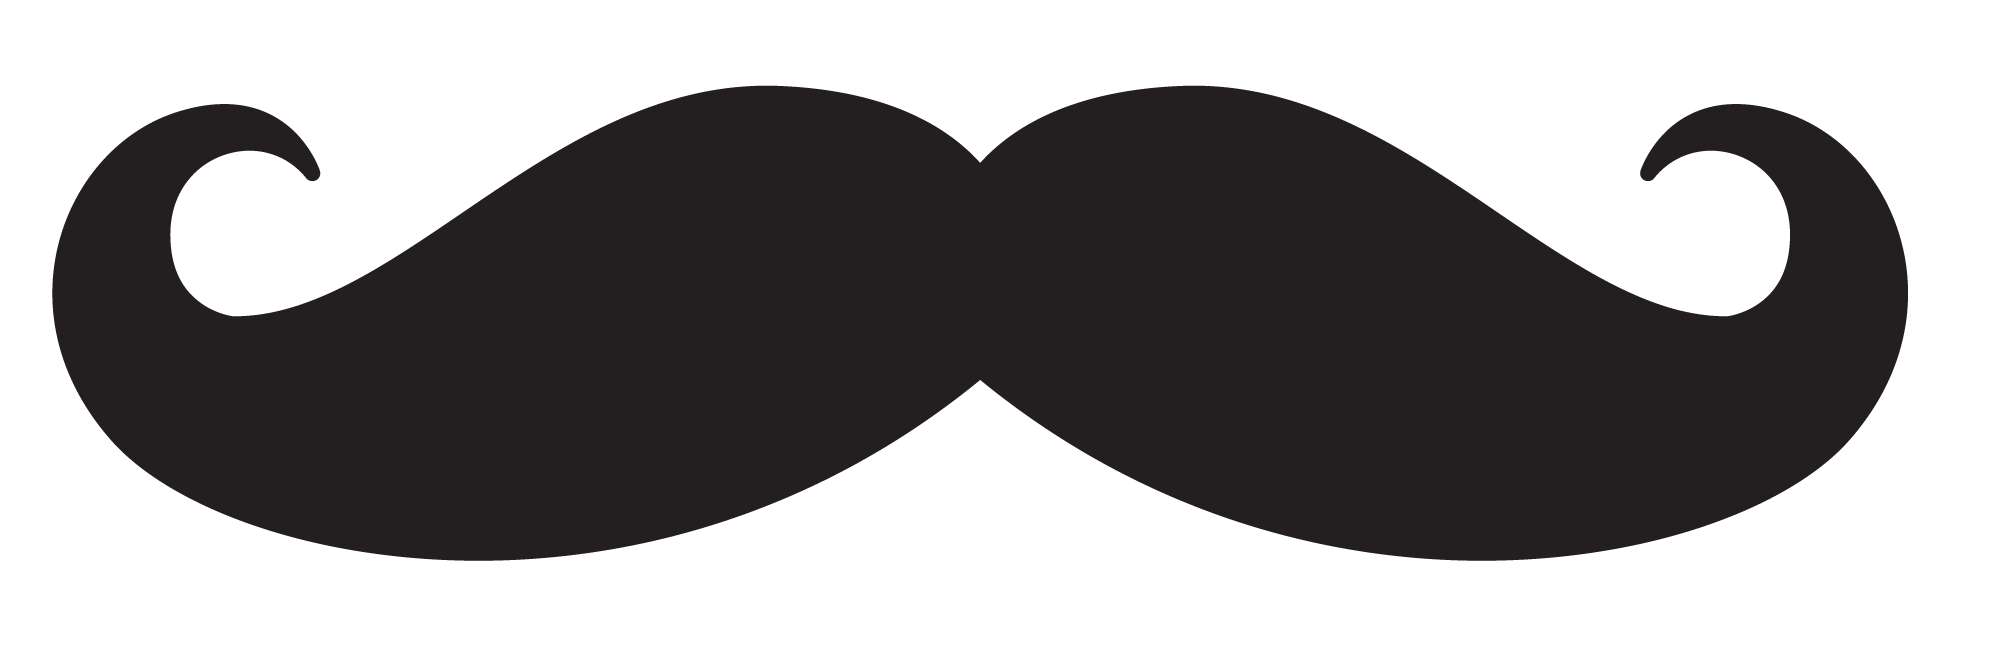 Mustache Black Download Free PNG